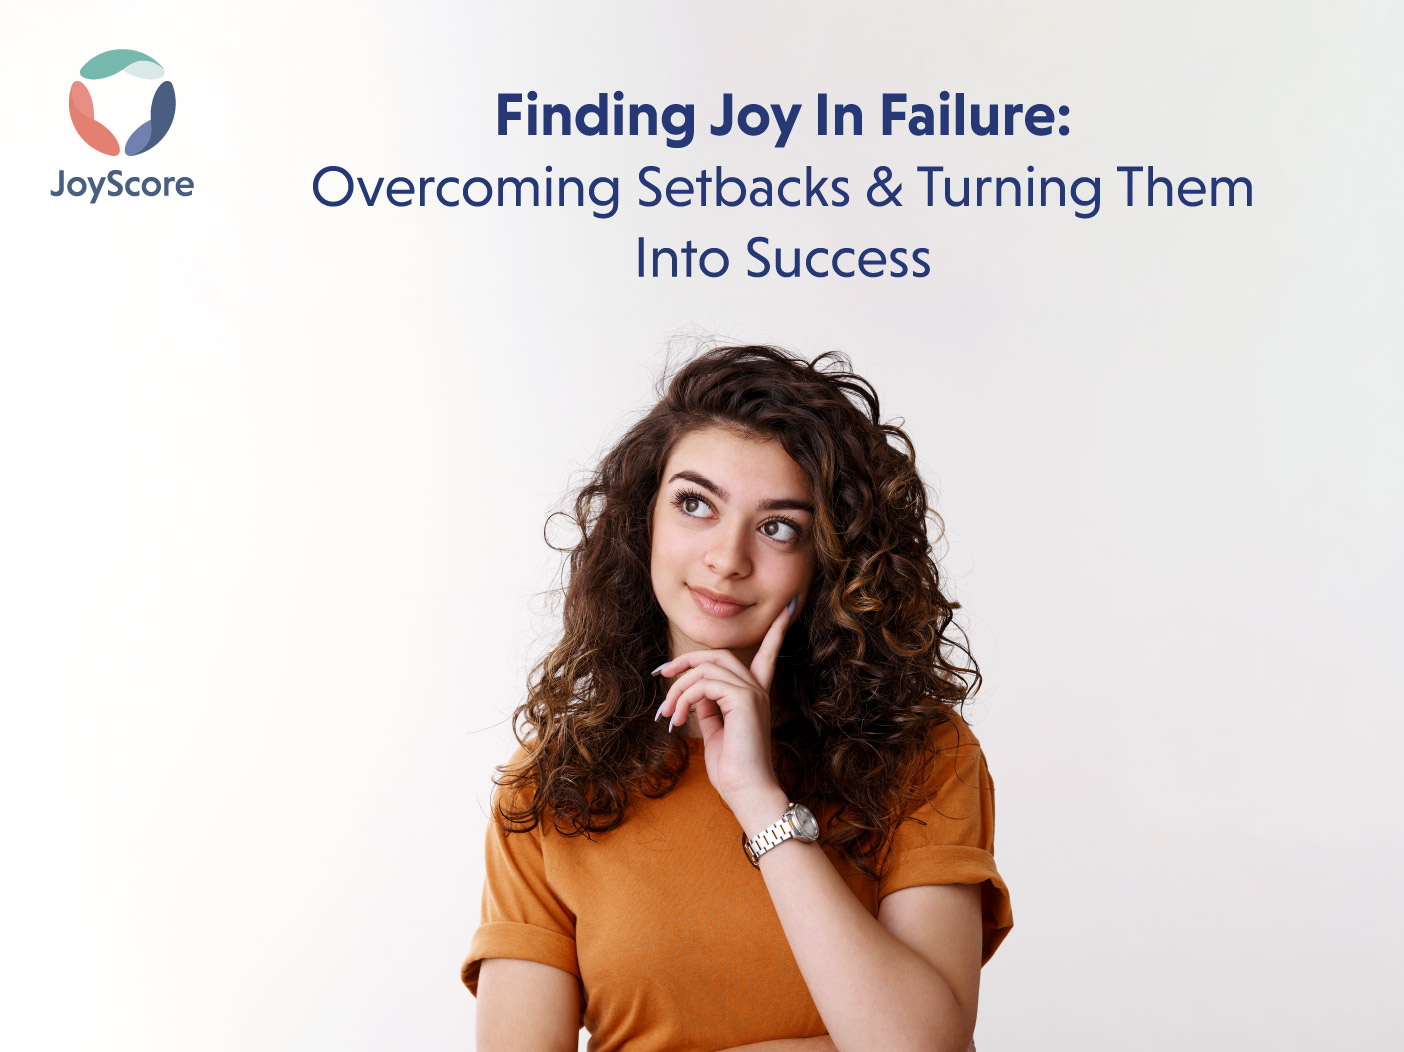 Finding Joy In Failure: Overcoming Setbacks And Turning Them Into Success